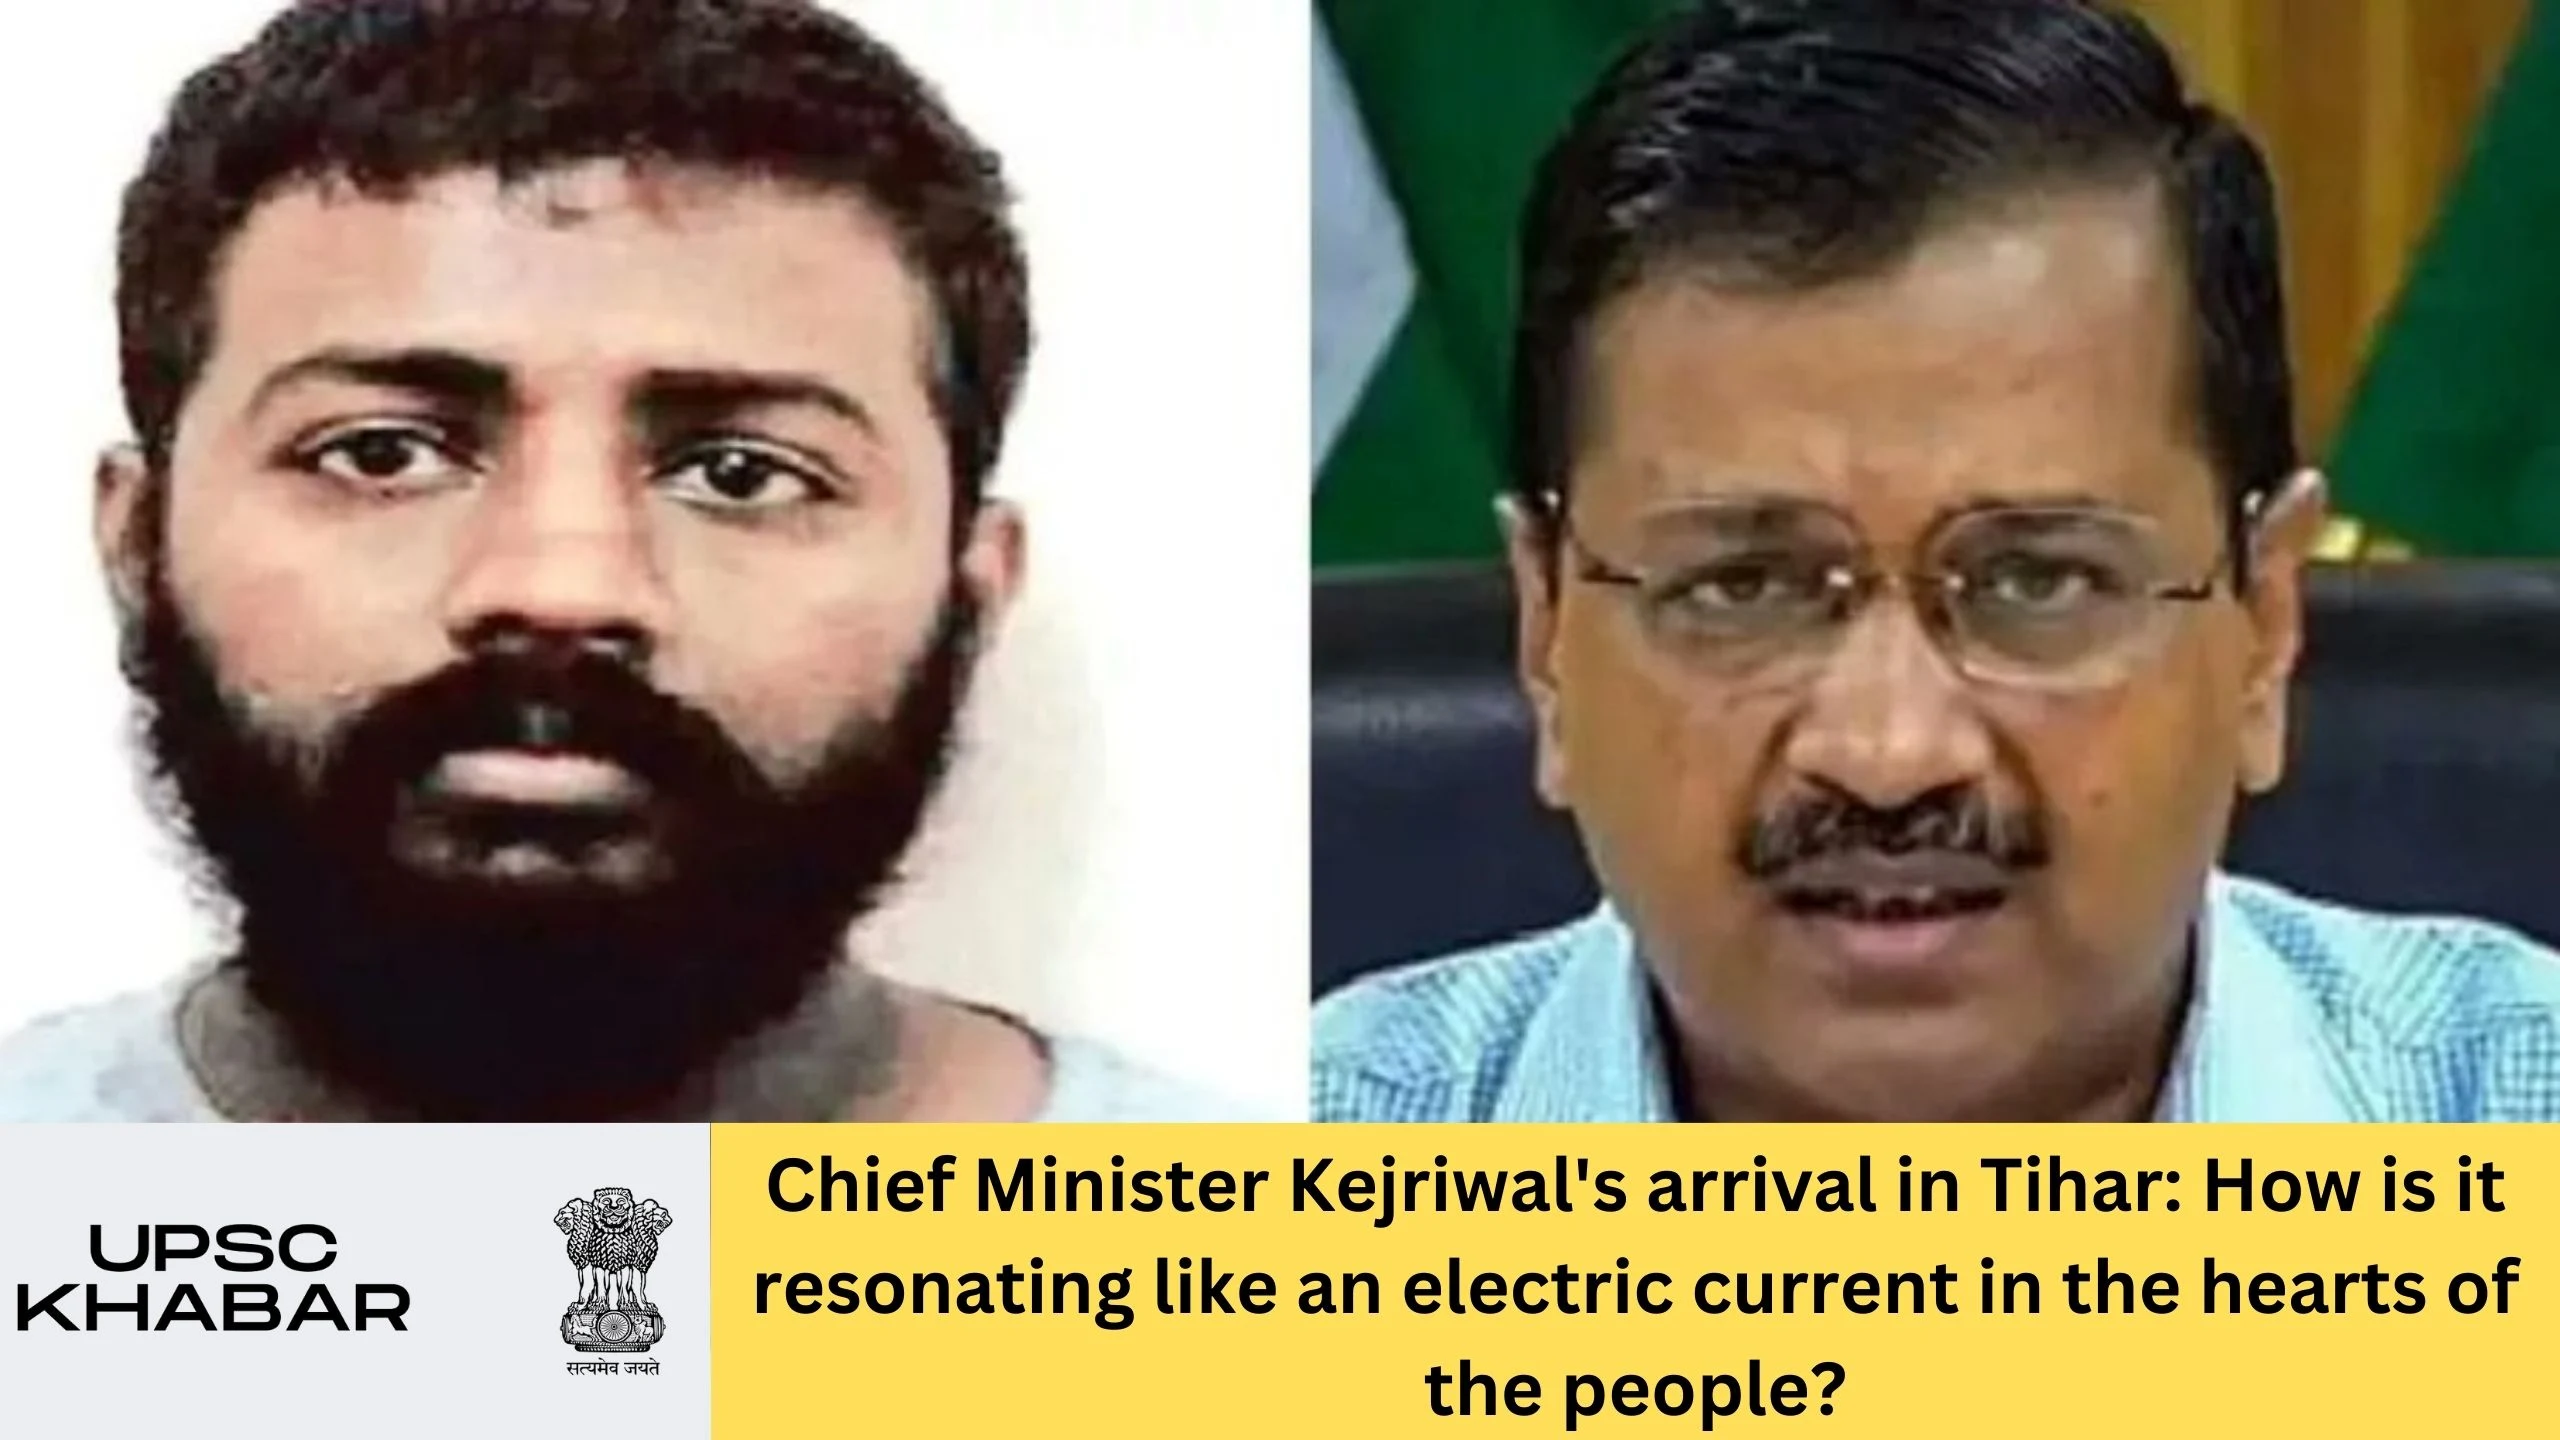 Chief Minister Kejriwal's arrival in Tihar: How is it resonating like an electric current in the hearts of the people?